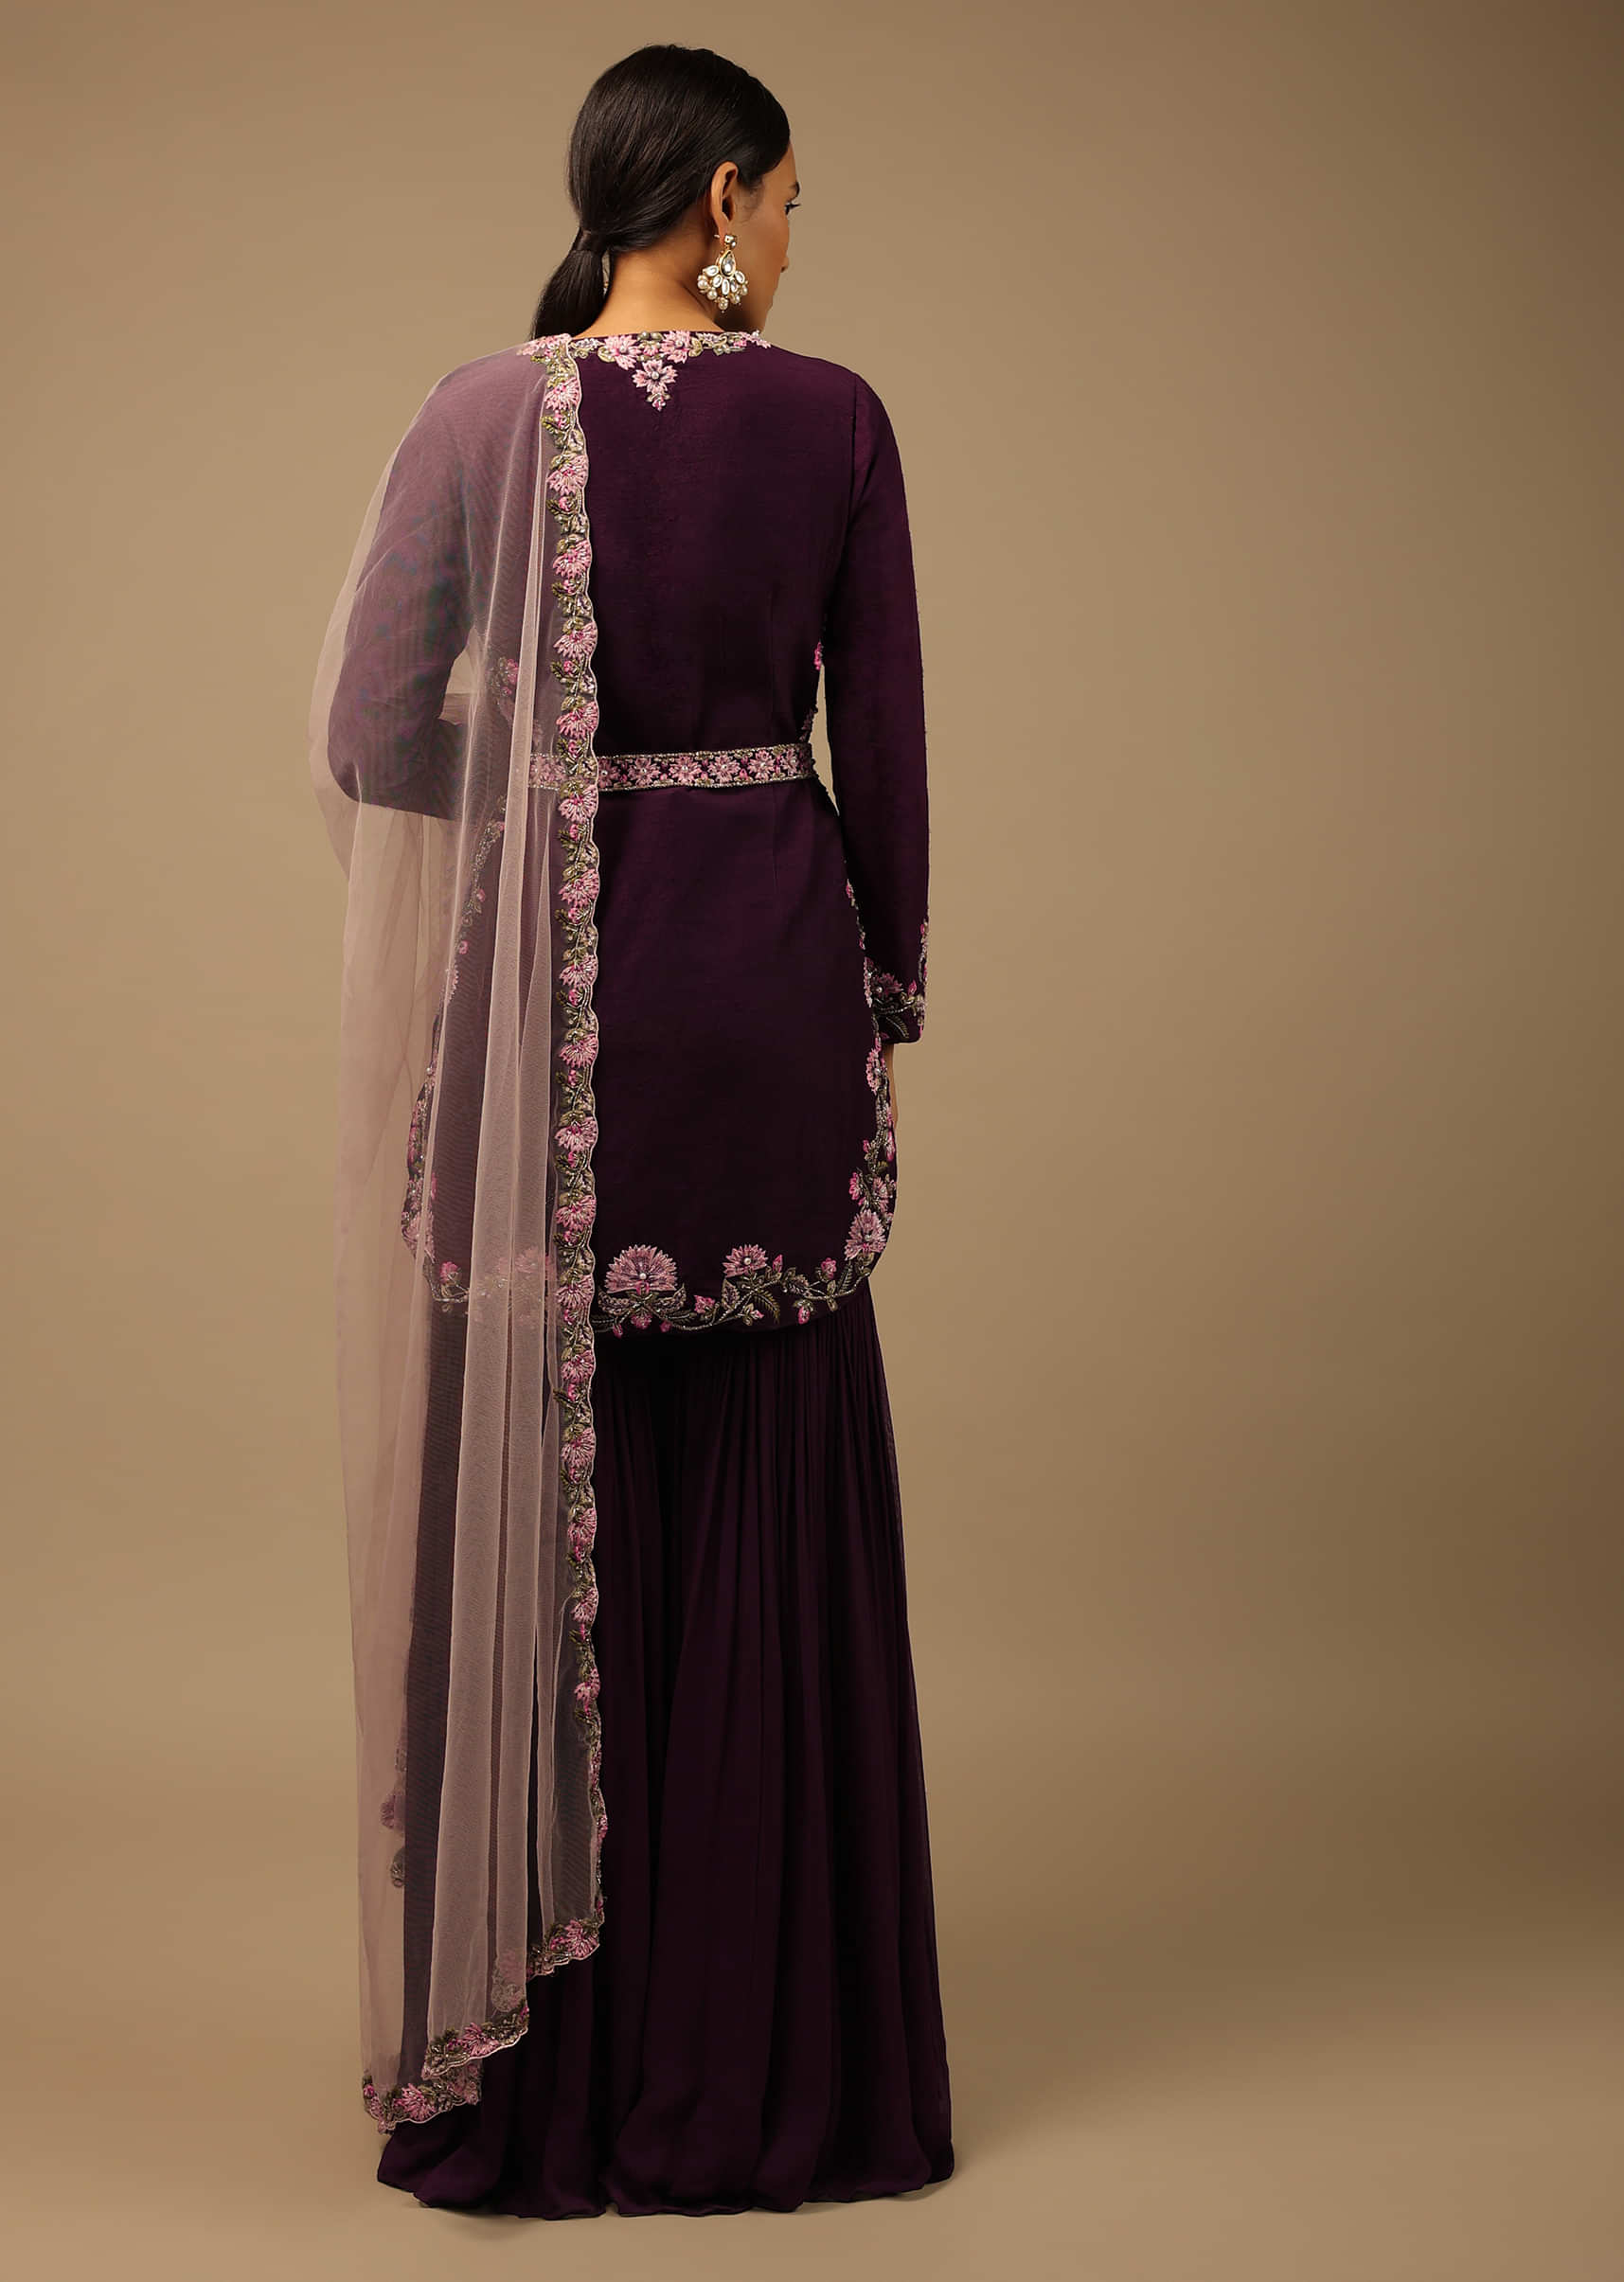 Grape Purple Sharara Suit With Multi Colored Resham Embroidered Floral Detailing And Peach Net Dupatta